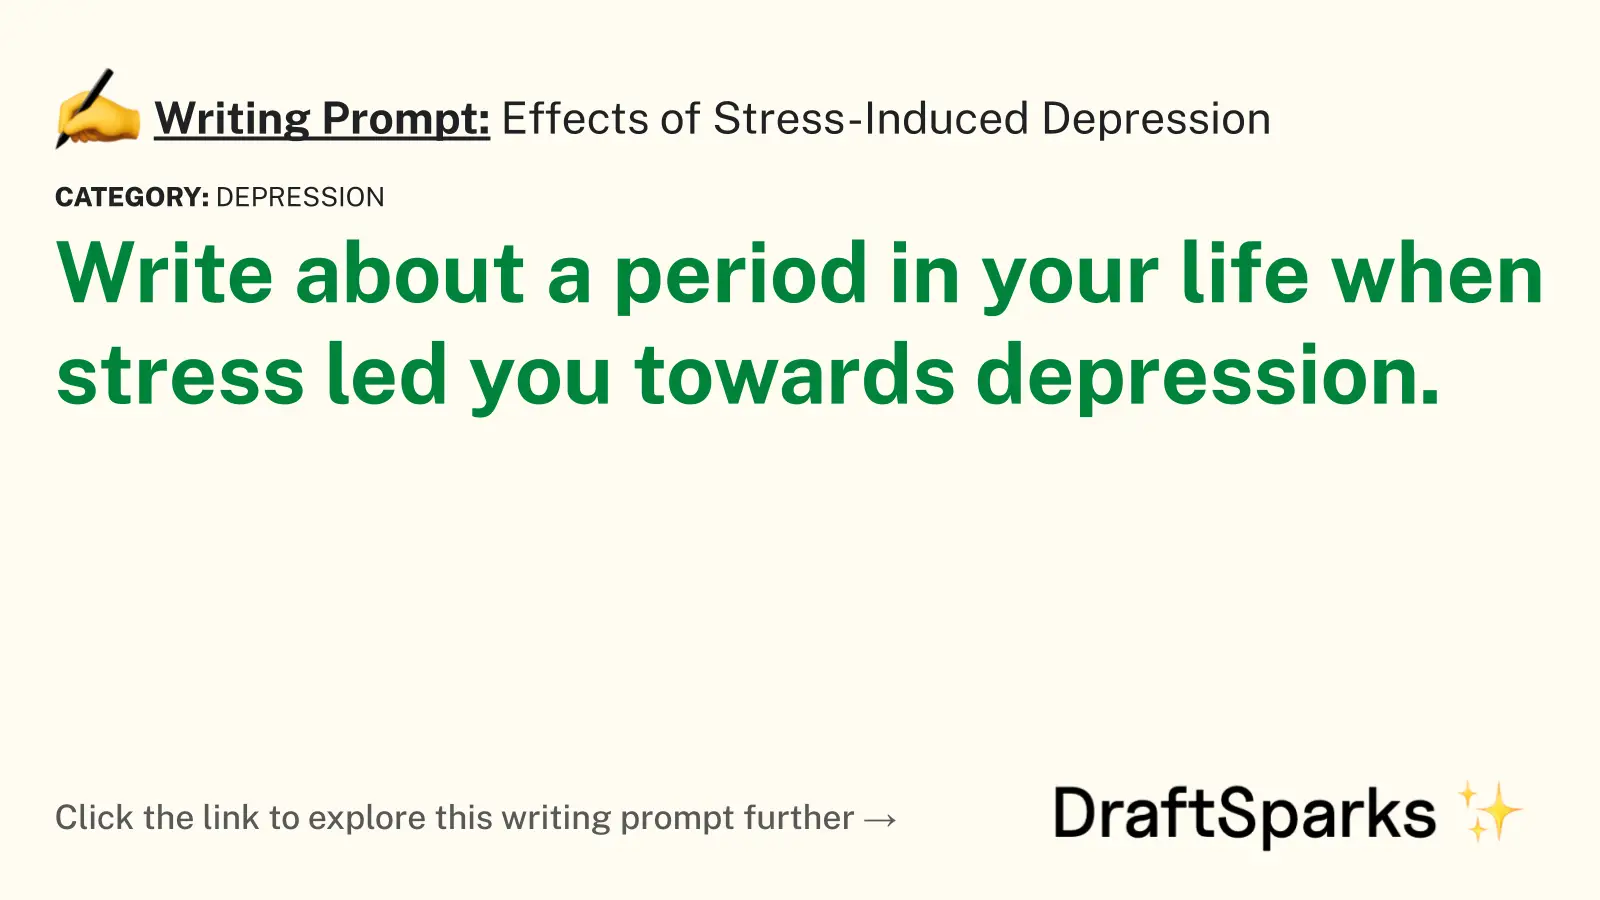 Effects of Stress-Induced Depression